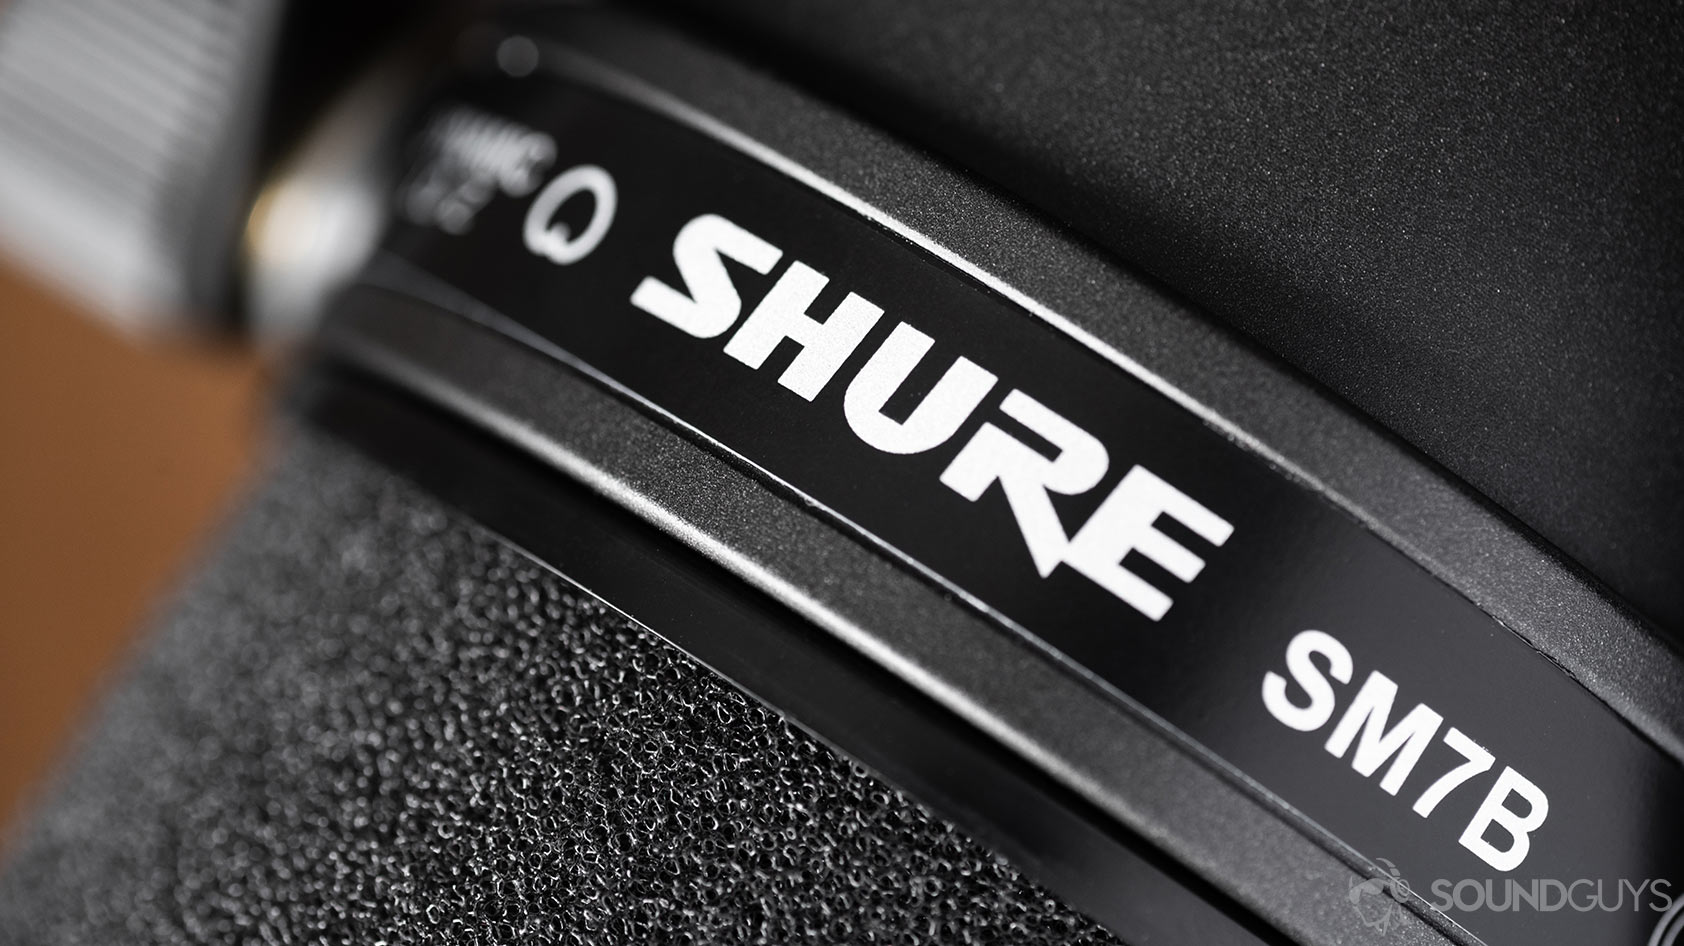 A macro photo of the Shure SM7B, one of the best mics for YouTube, and the Shure logo and cardioid icon.